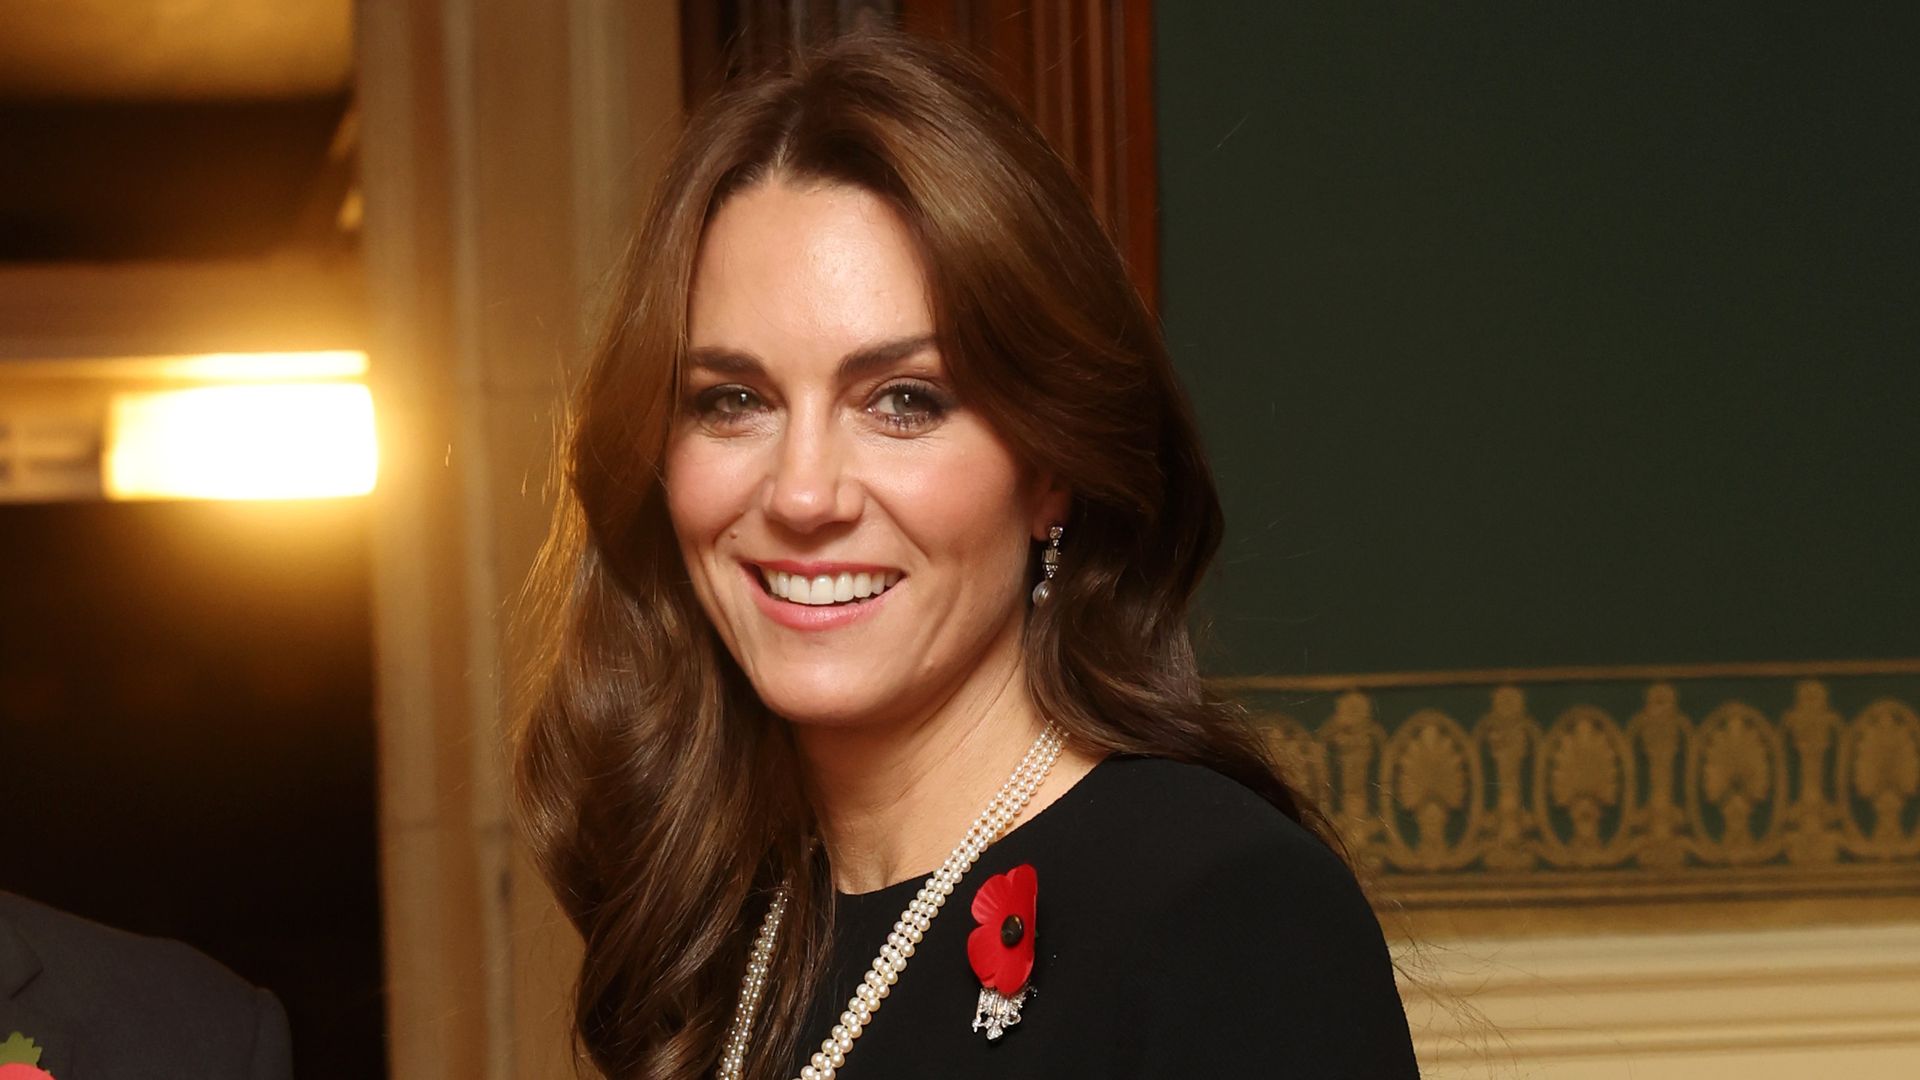 Kate Middleton in a black dress with pearl necklace